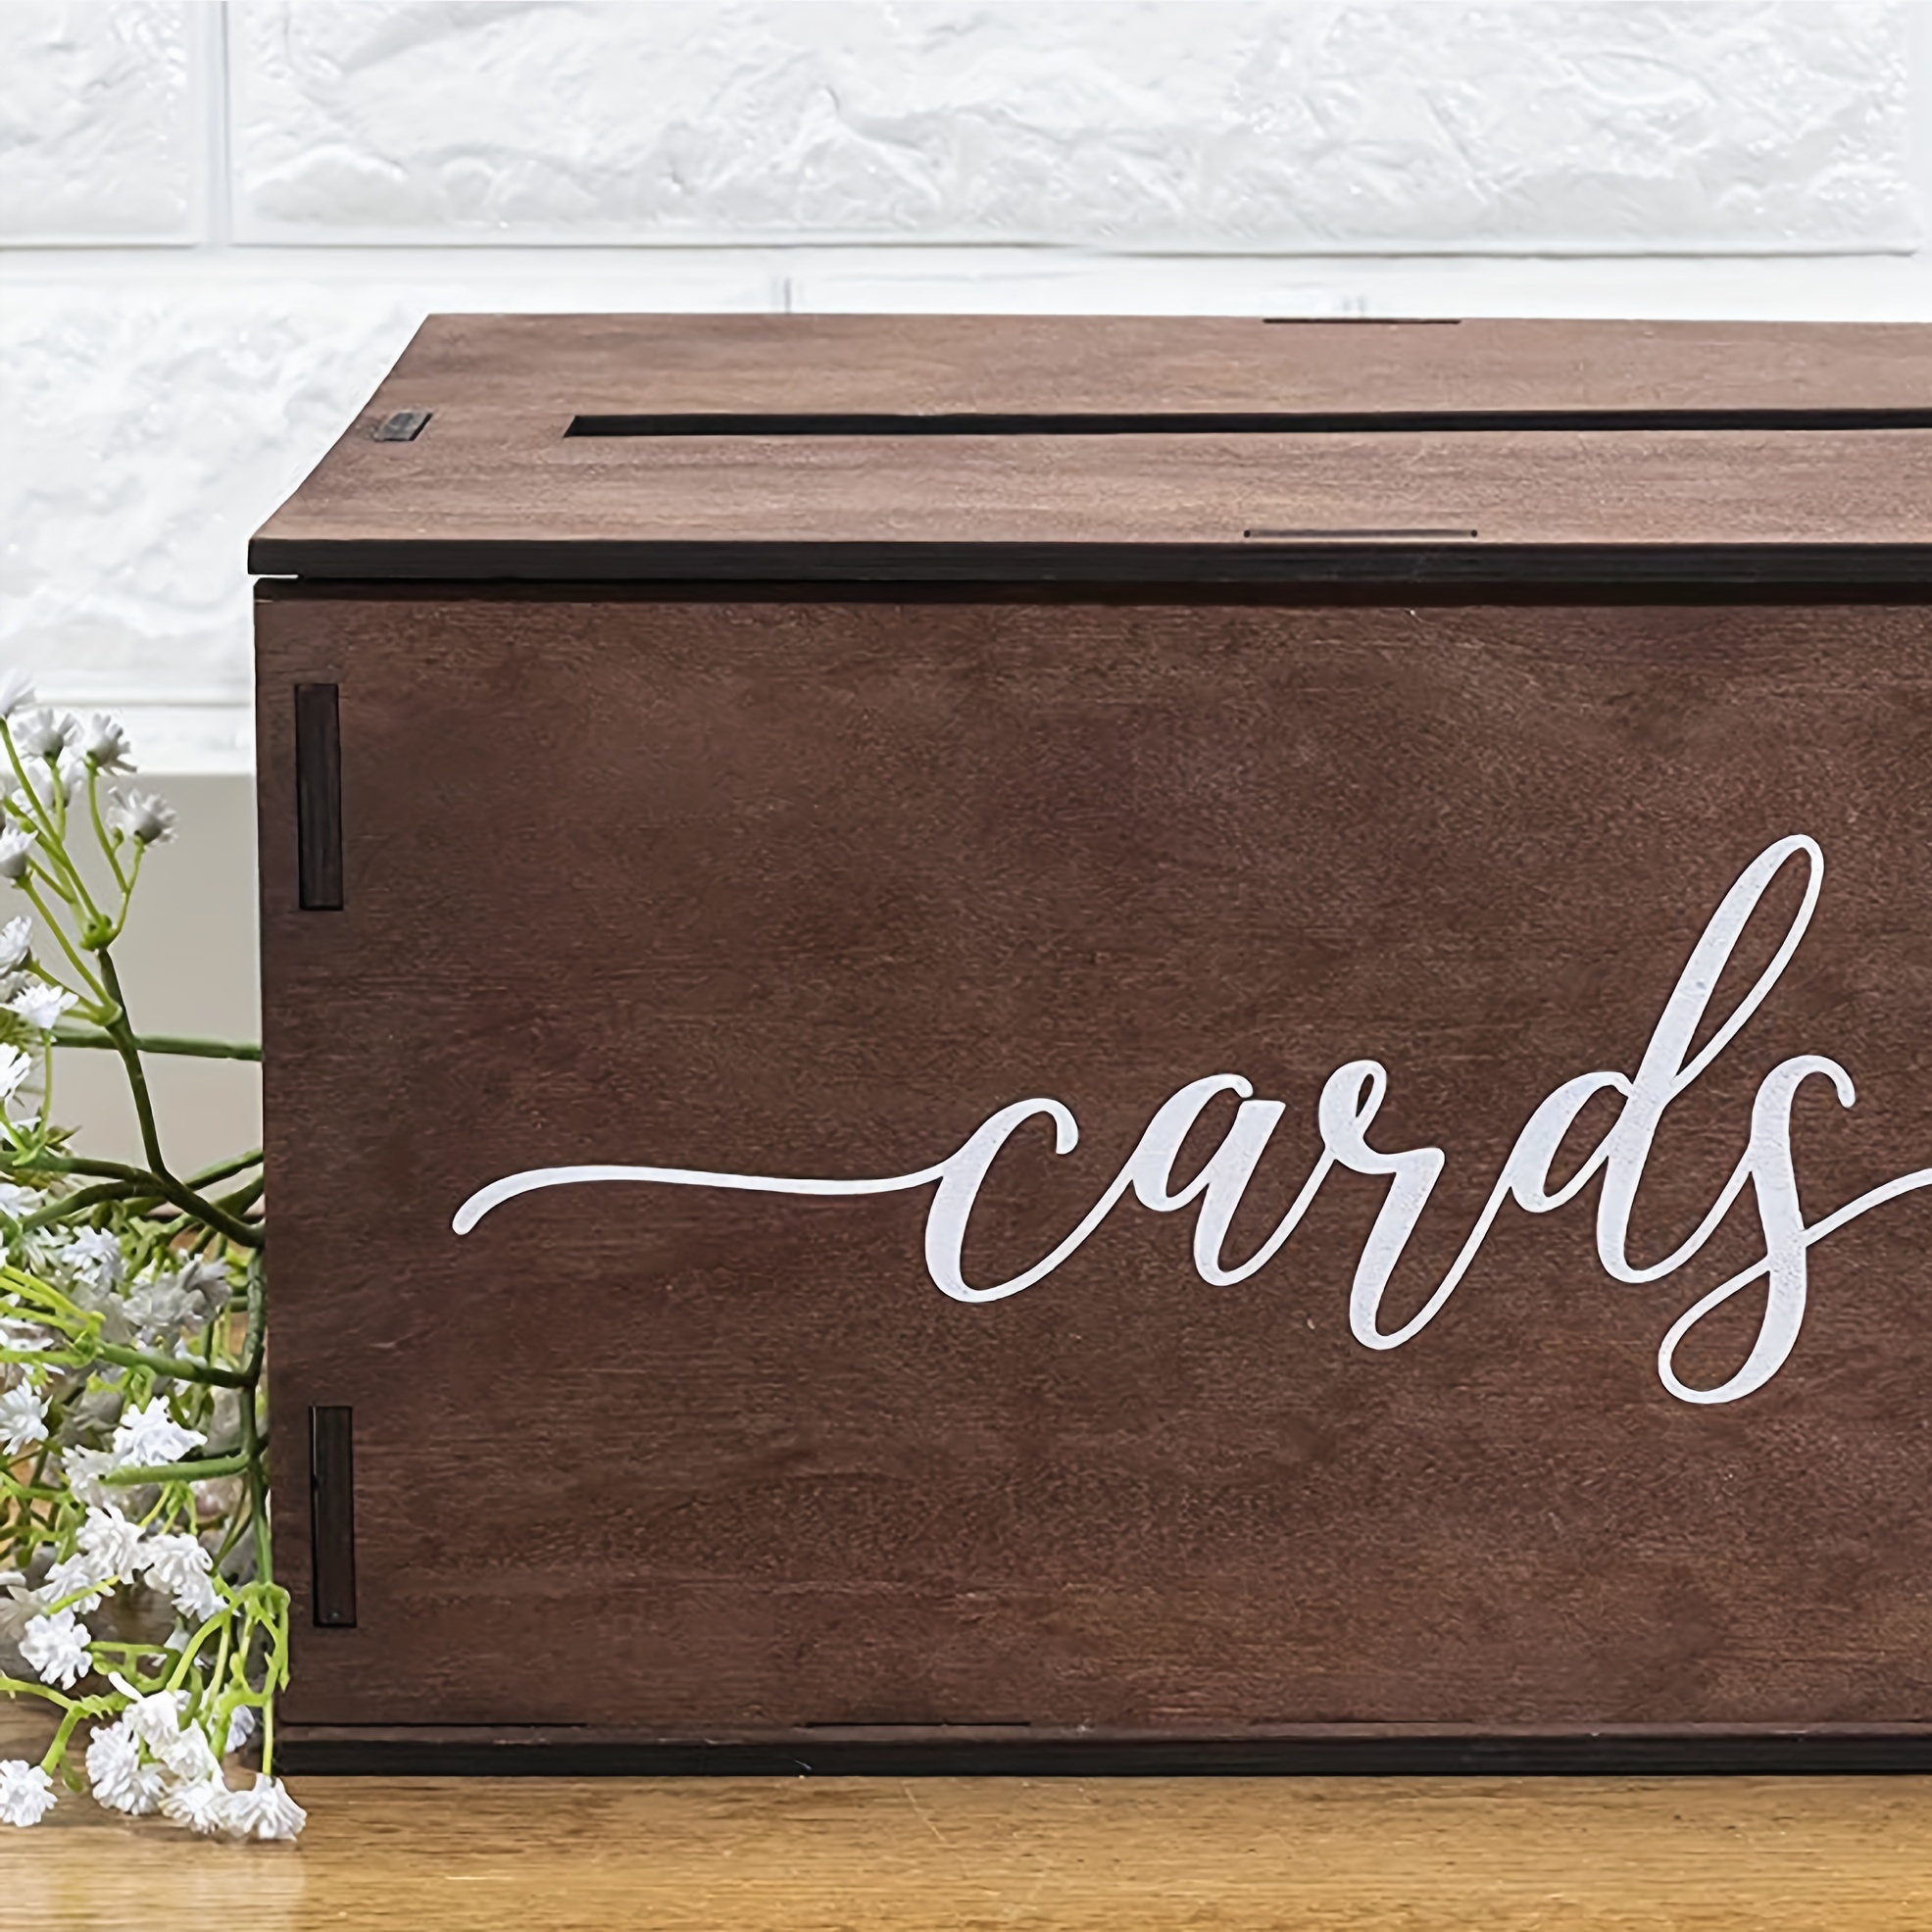 Rustic Wooden Wedding Card Box With Slot - Perfect For Reception